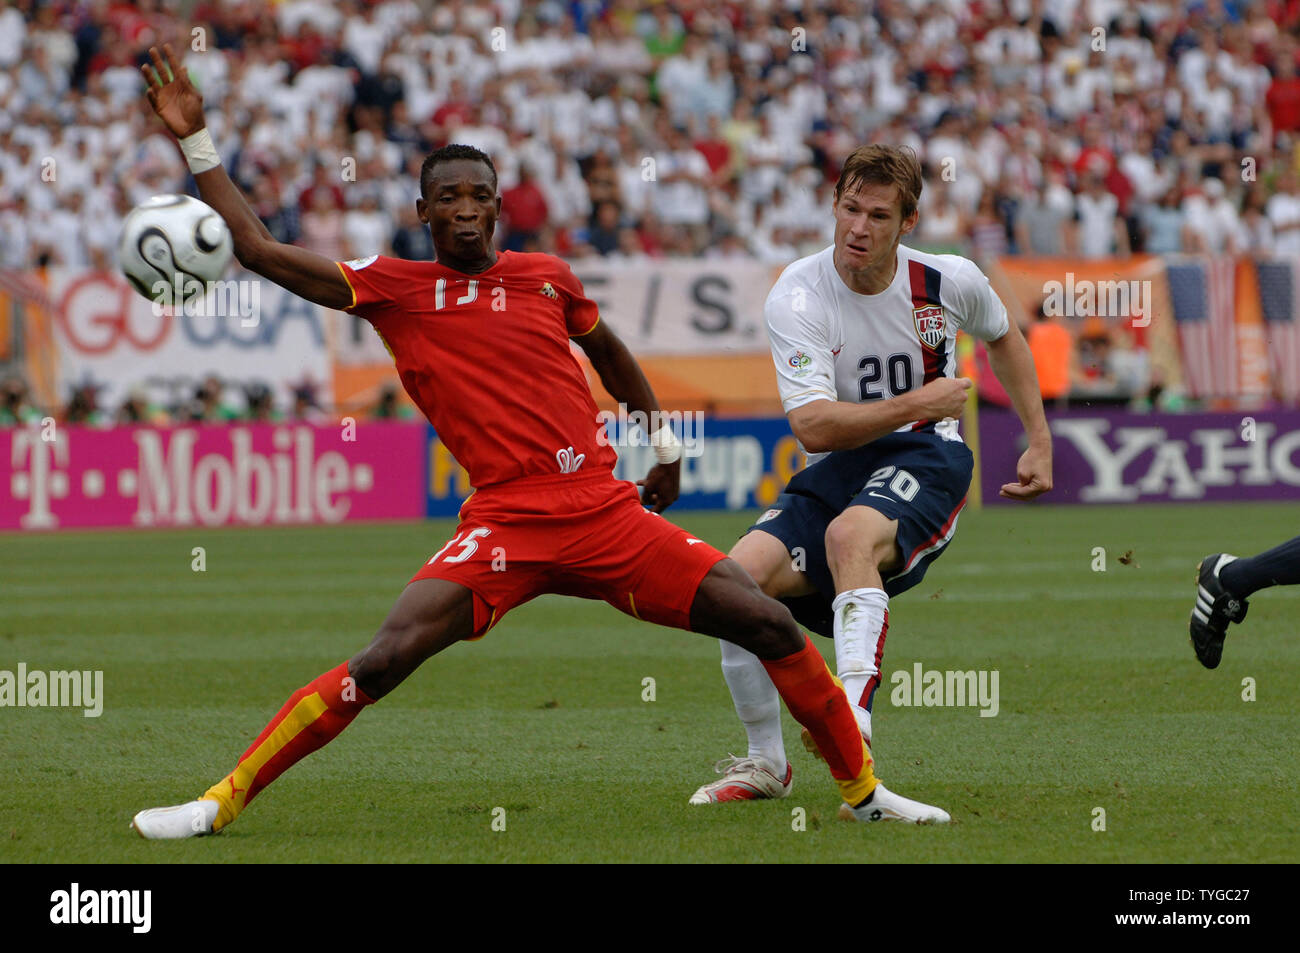 Habib Mohammed of Ghana (L) and Brian Mc Bride of theUSA move toward the ball in the  World Cup soccer action in Nuernberg, Germany on June 22, 2006. Ghana defeated the USA 2-1.  (UPI Photo/Frank Hoermann) Stock Photo